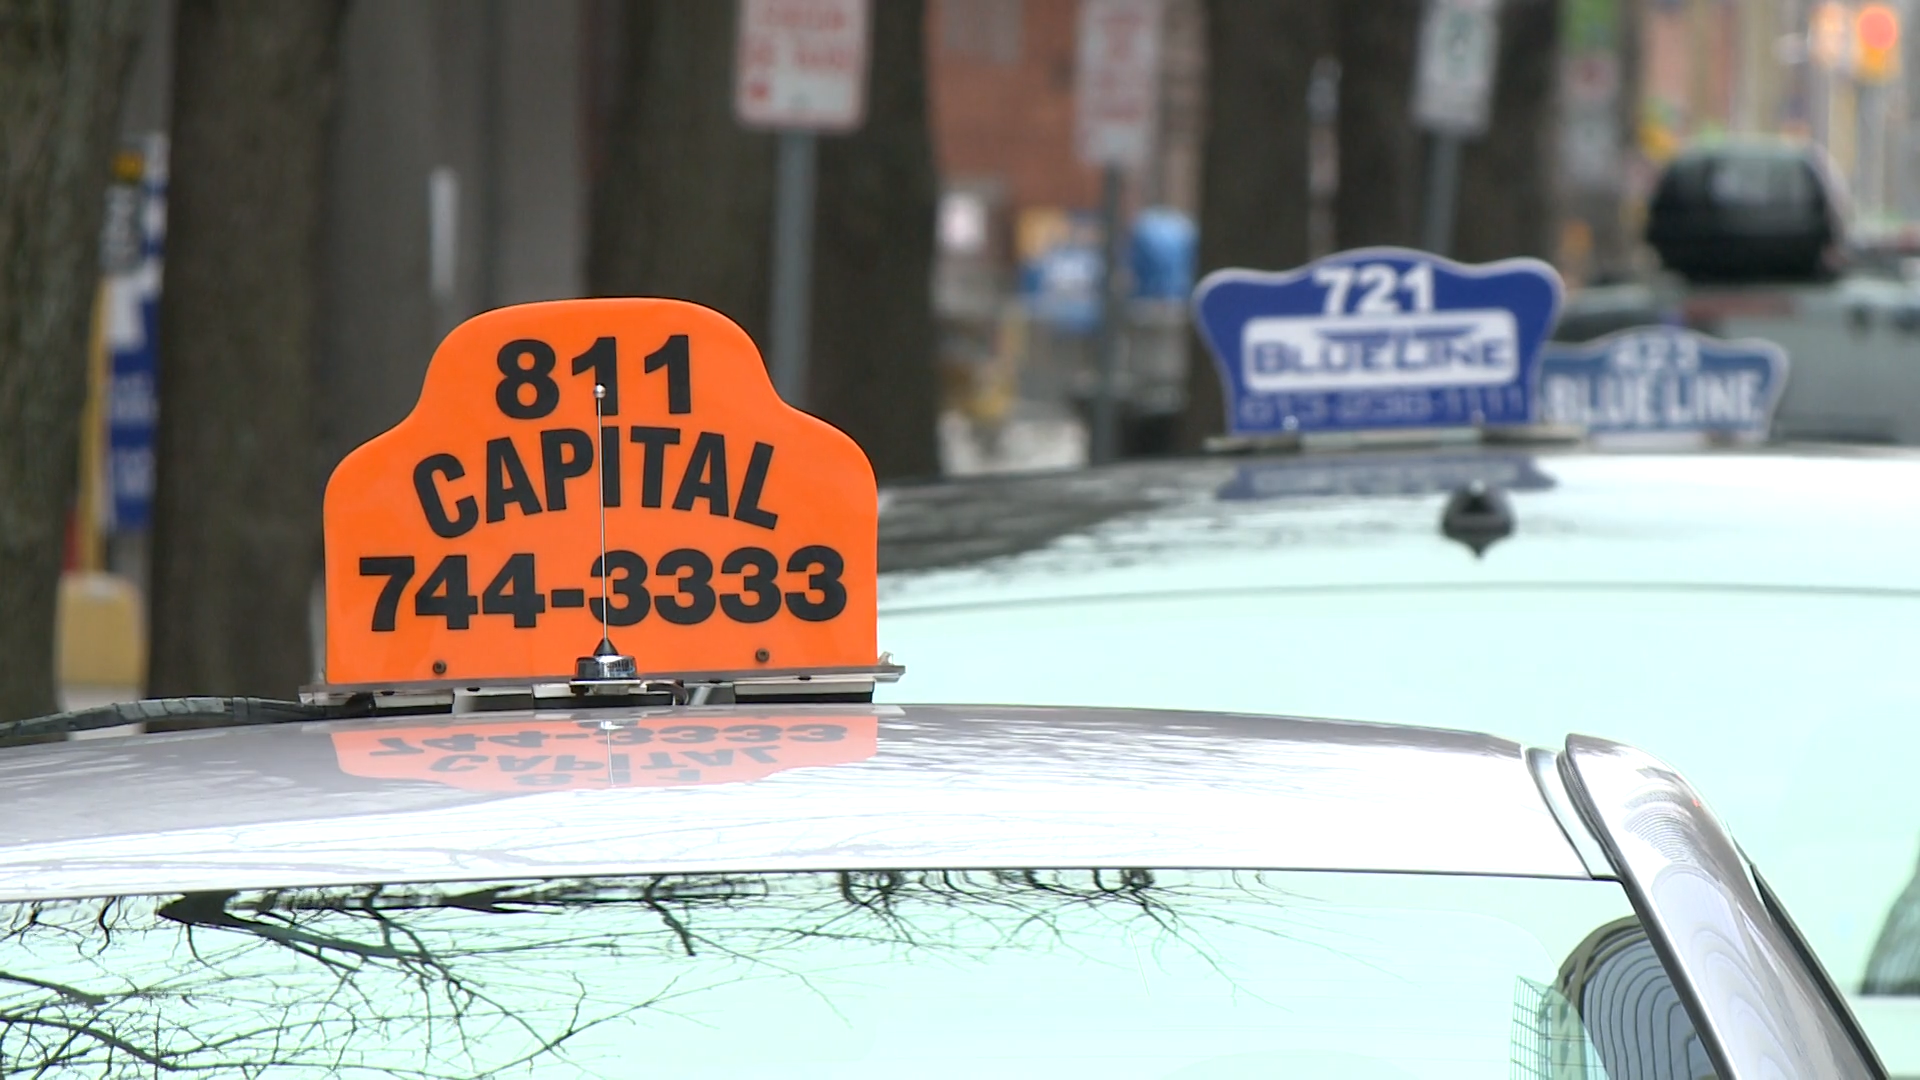 The Morning Rush  - Abdalla Barqawi Interview "Taxi industry's $215 million lawsuit against city of Ottawa heads "